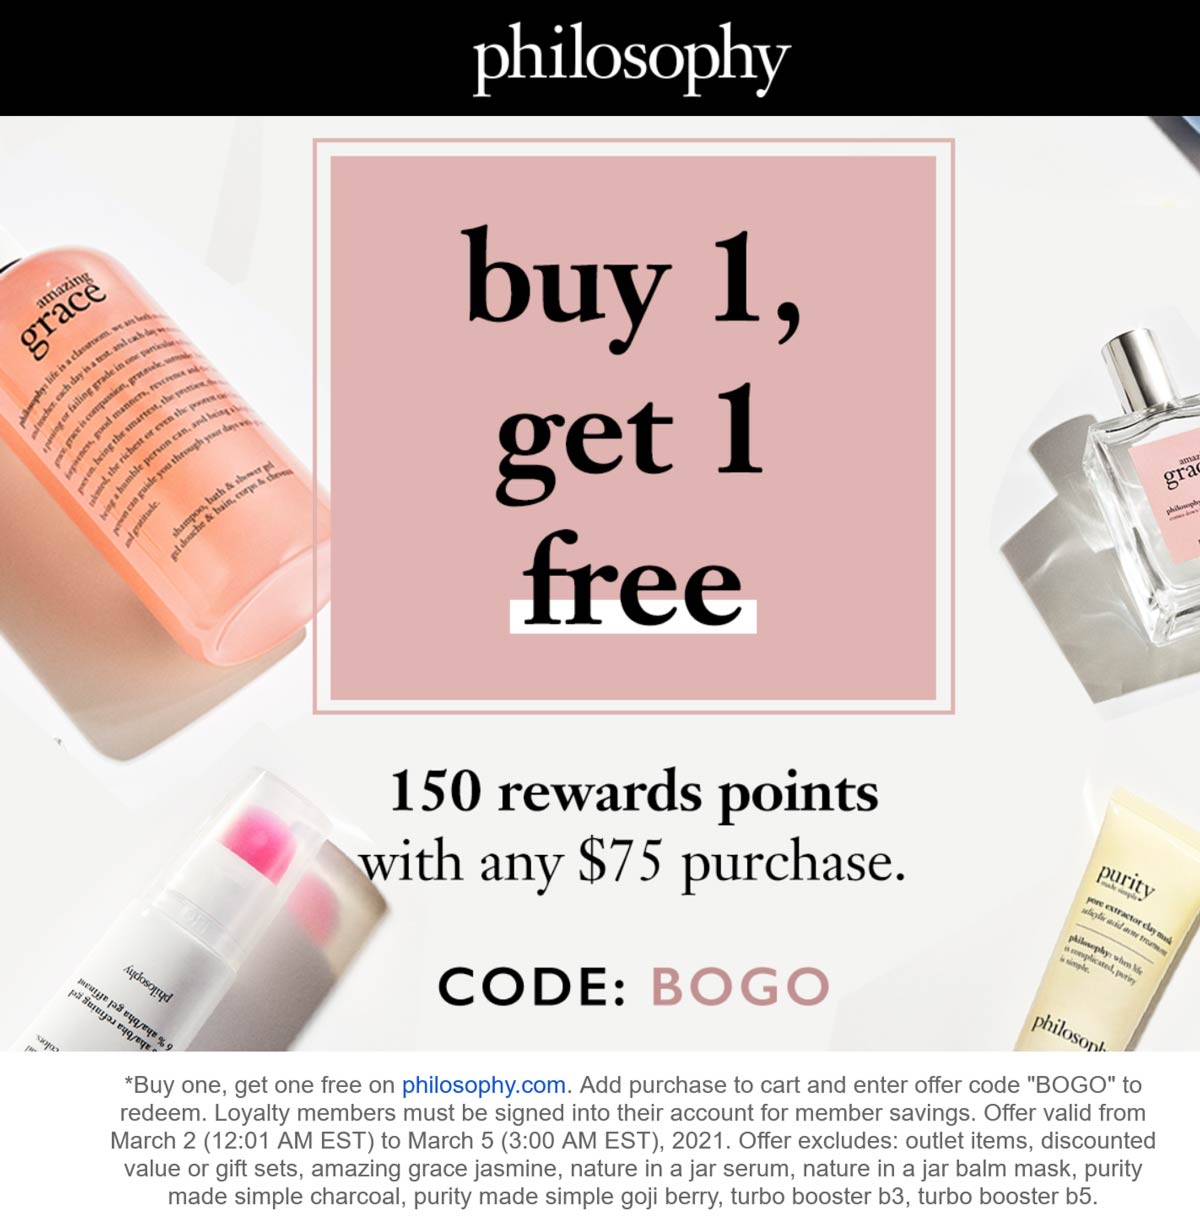 Philosophy stores Coupon  Second item free today at Philosophy via promo code BOGO #philosophy 